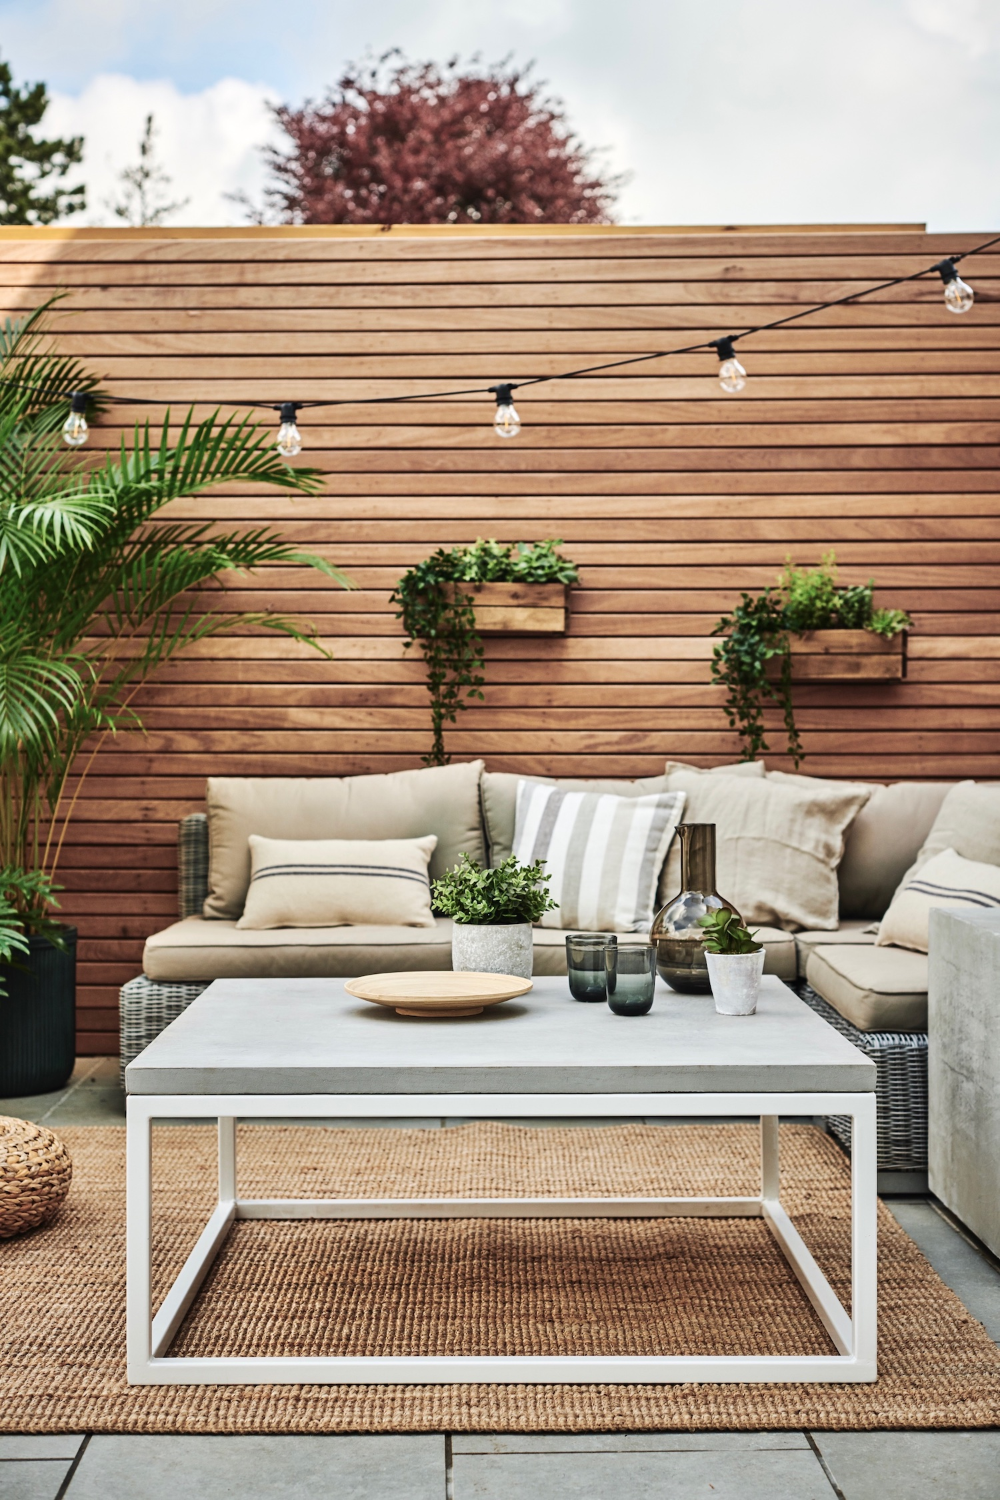 Garden Furniture Transform Your Outdoor Space with Stylish and Functional Outdoor Décor